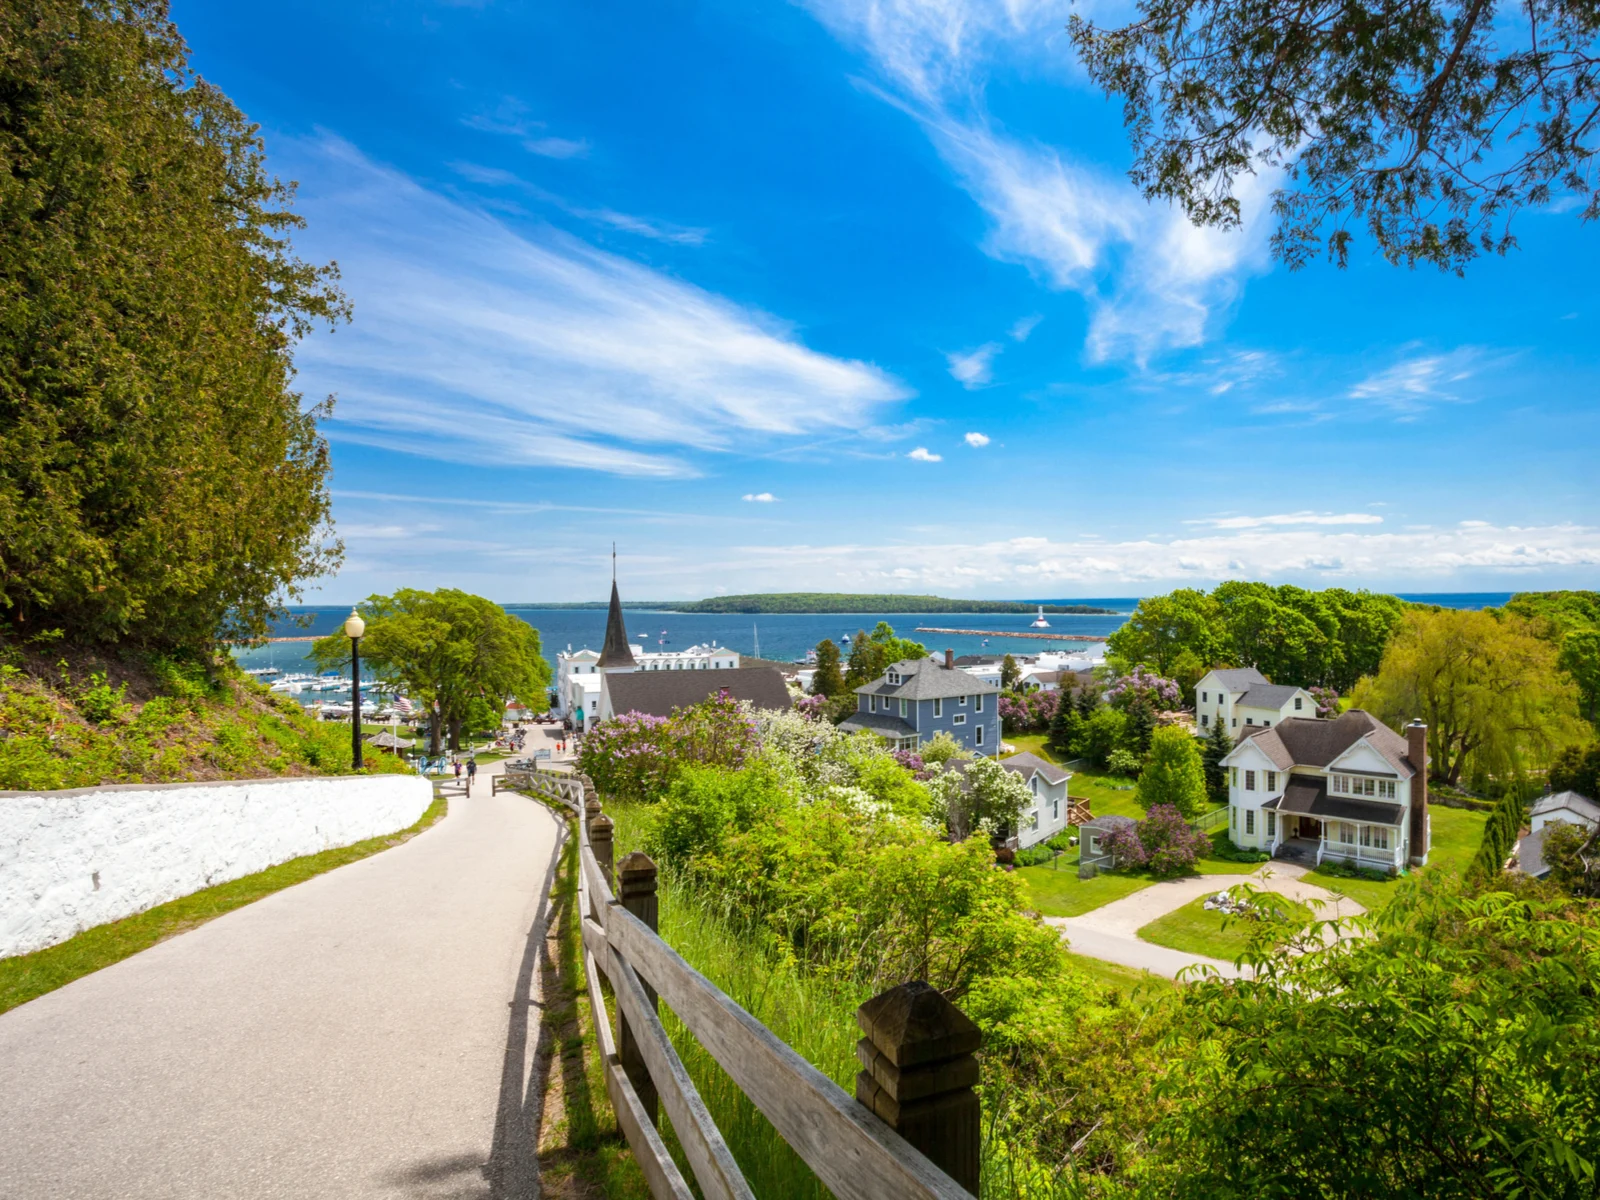 View of Mackinac Island from the top of a walking trail with lots of greenery and blue sky